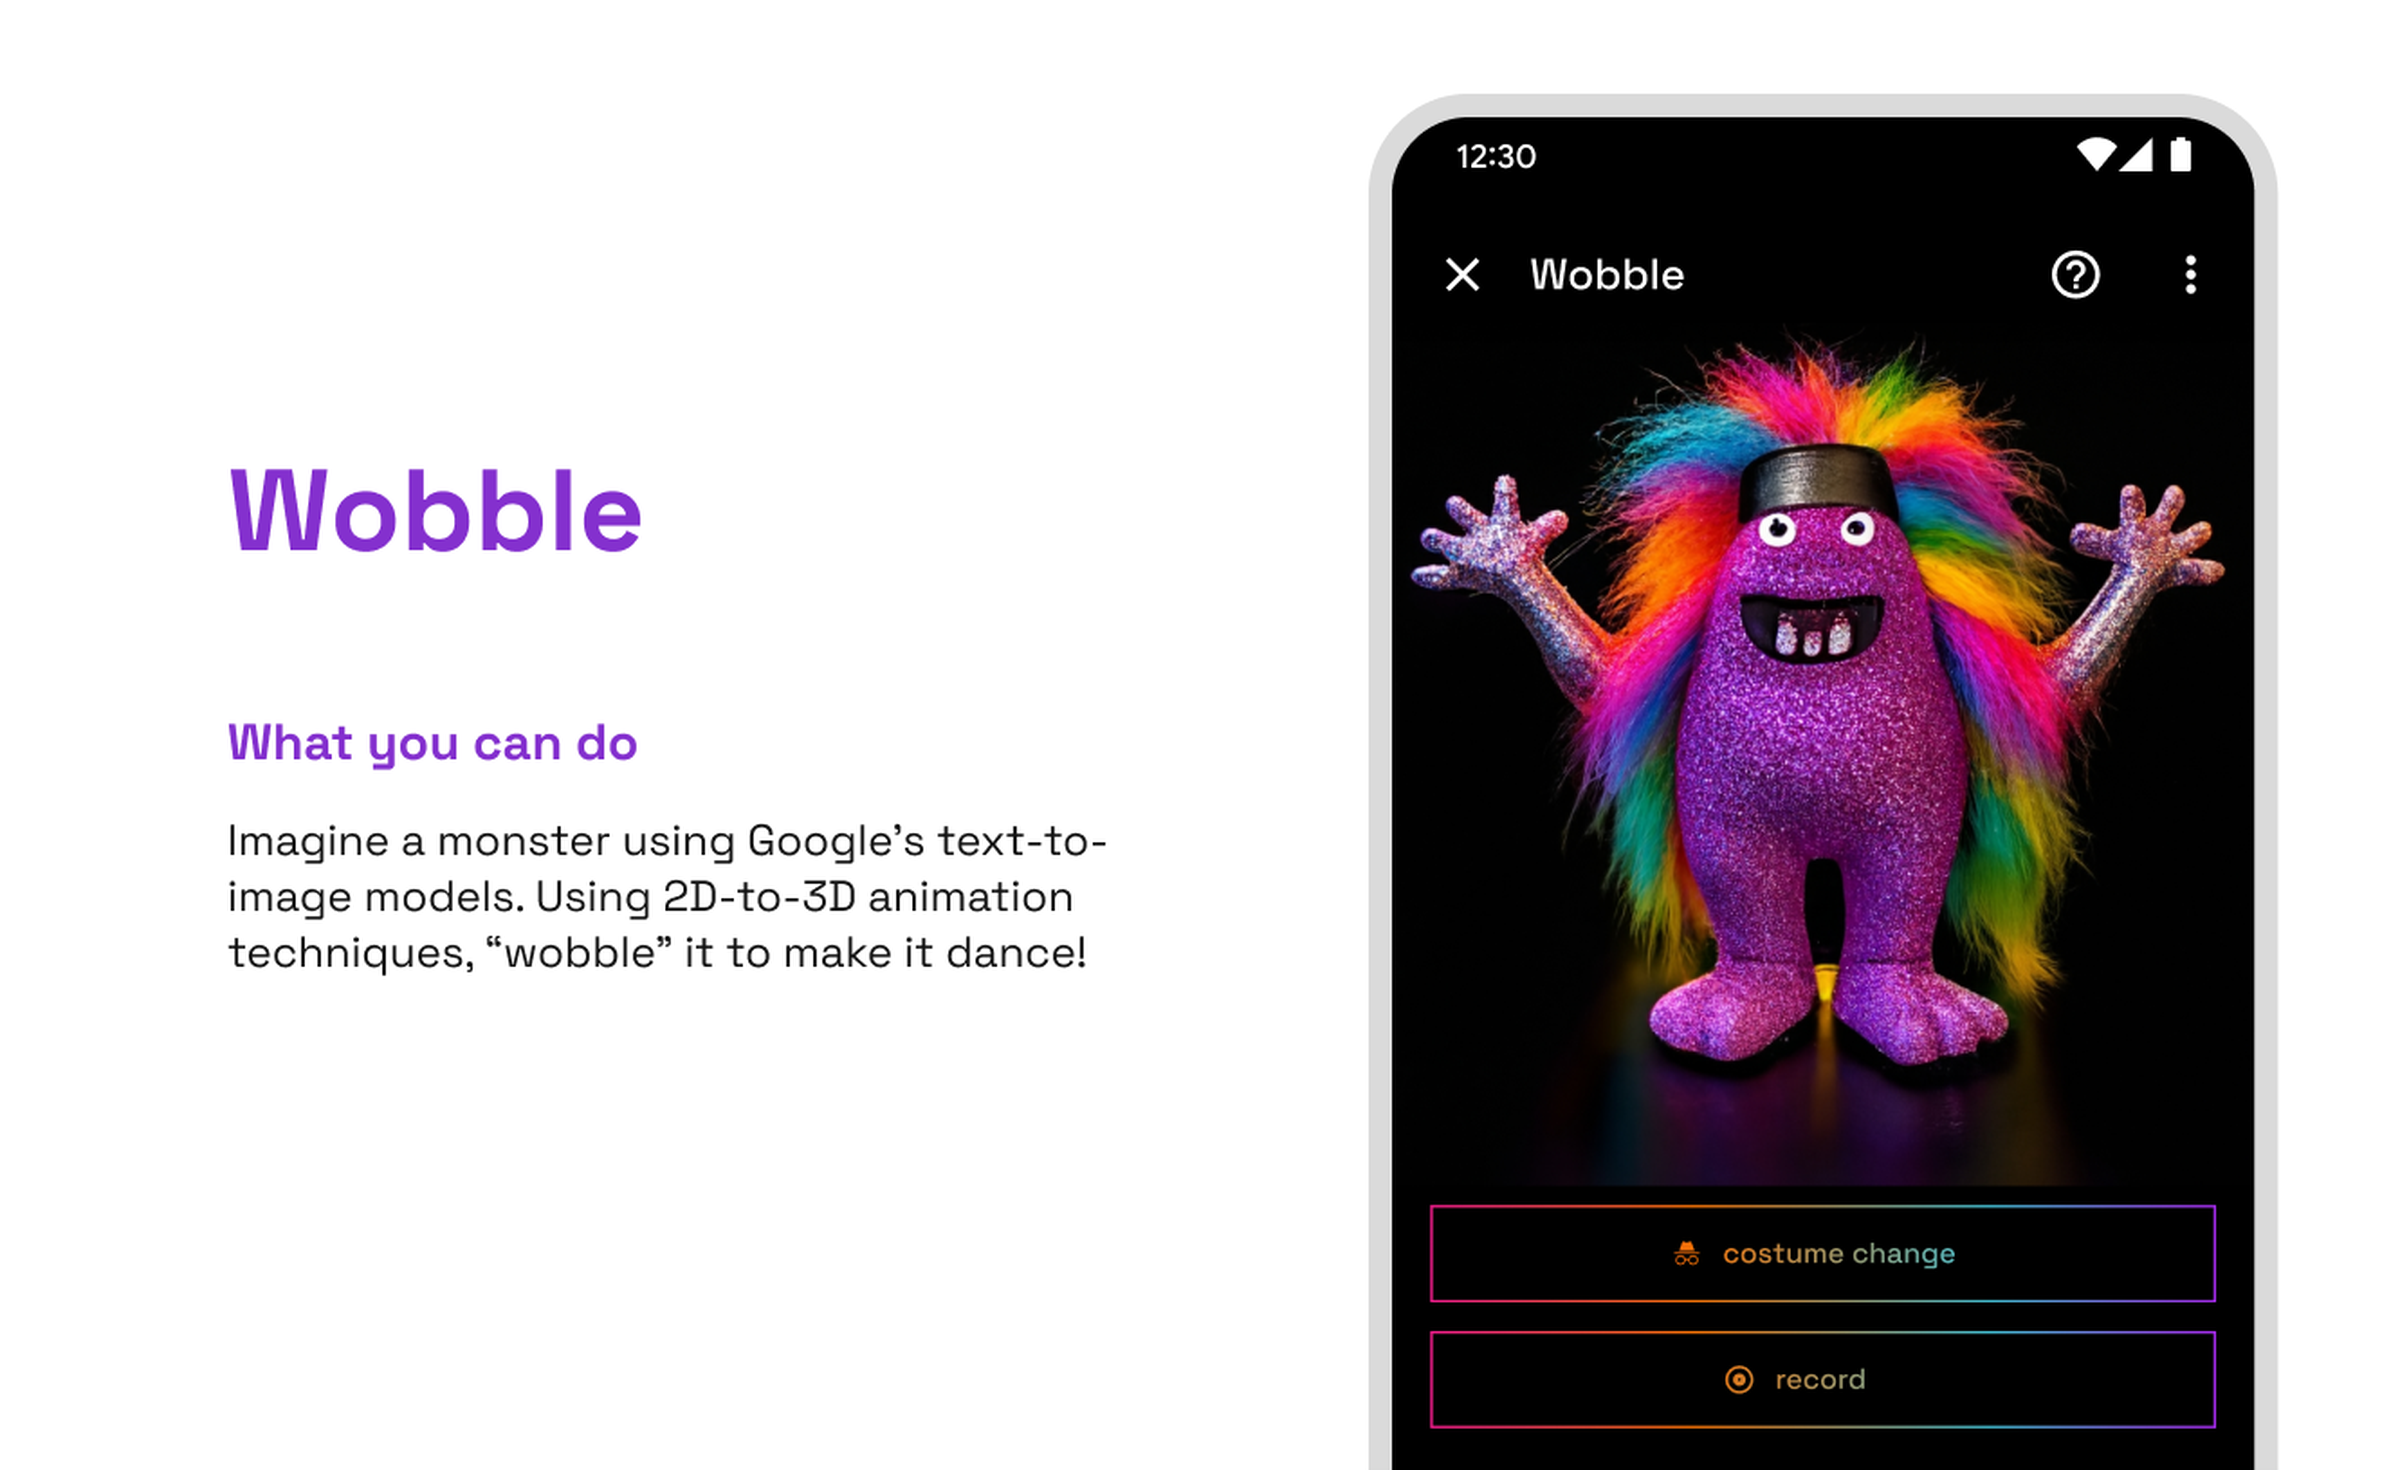 The “Wobble” feature lets users design a monster and make it dance.